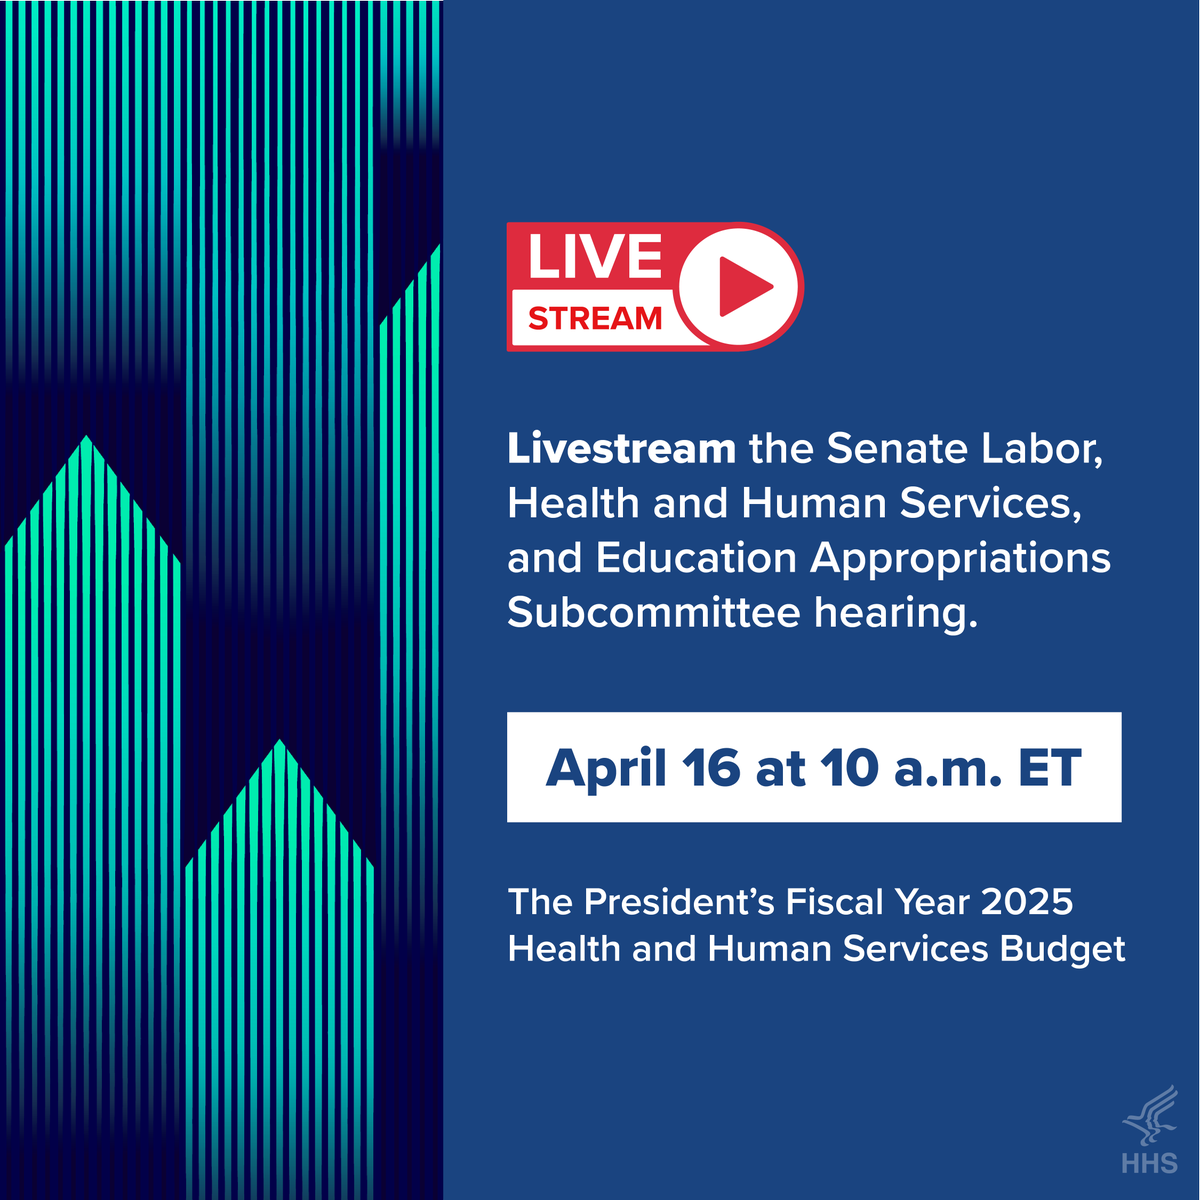 At 10am ET, I will testify in front of the Senate Labor, Health and Human Services, and Education Appropriations Subcommittee on the President’s Fiscal Year 2025 Health and Human Services Budget. You can stream it live here: appropriations.senate.gov/hearings/a-rev…